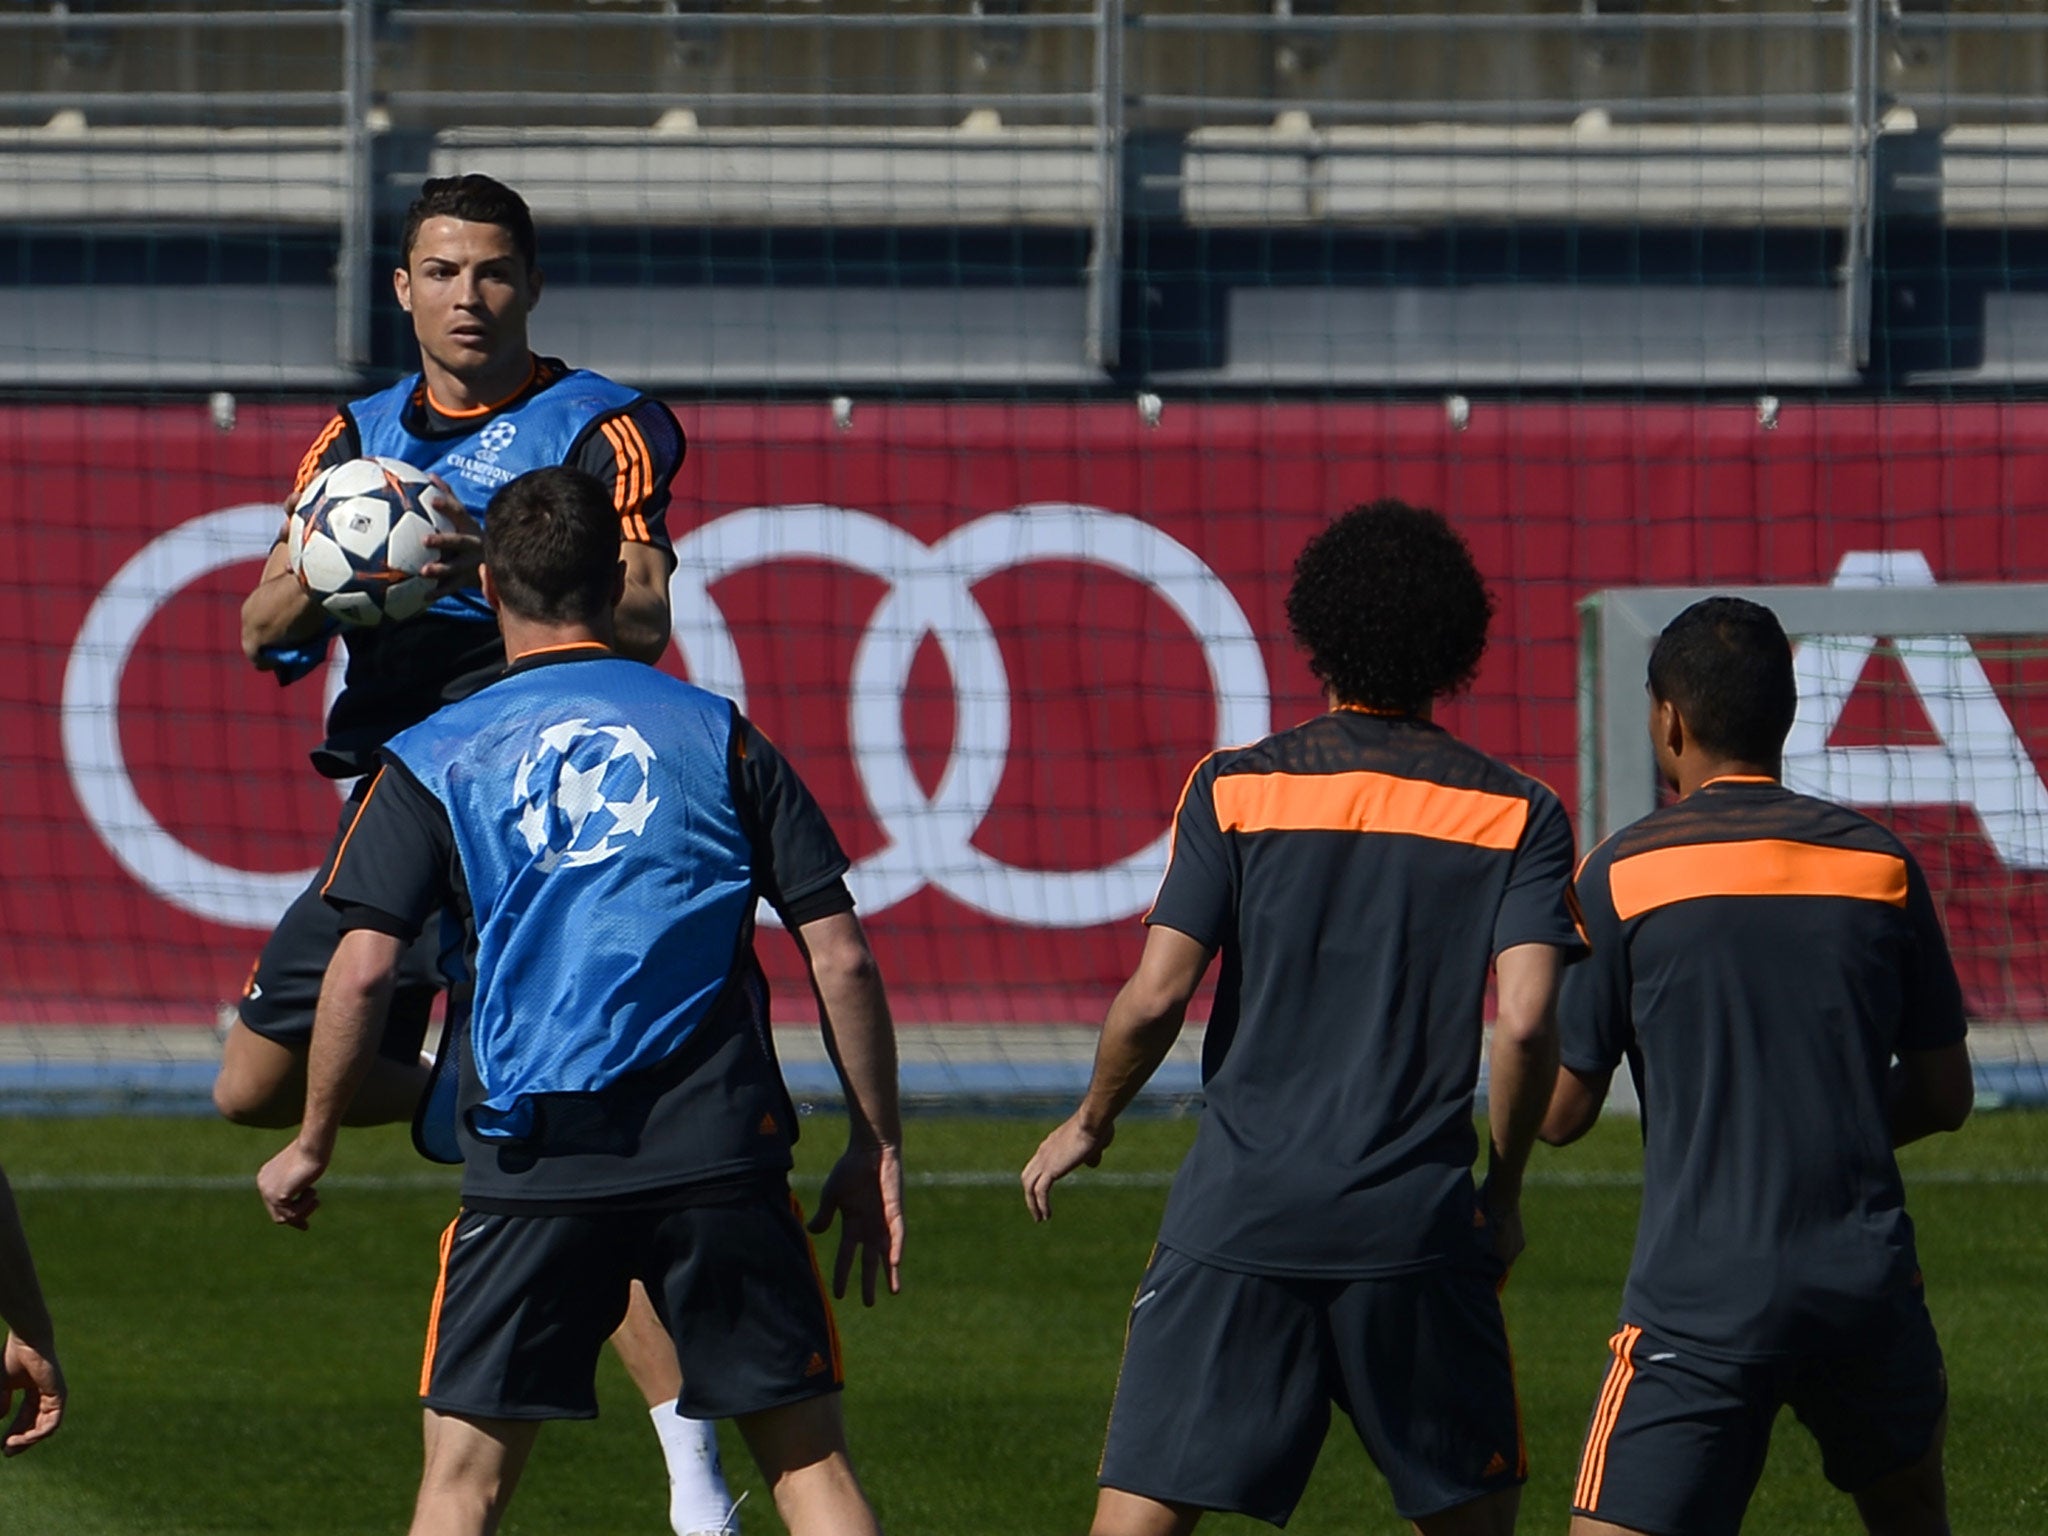 Cristiano Ronaldo pictured training for Real Madrid prior to his team's game against Schalke